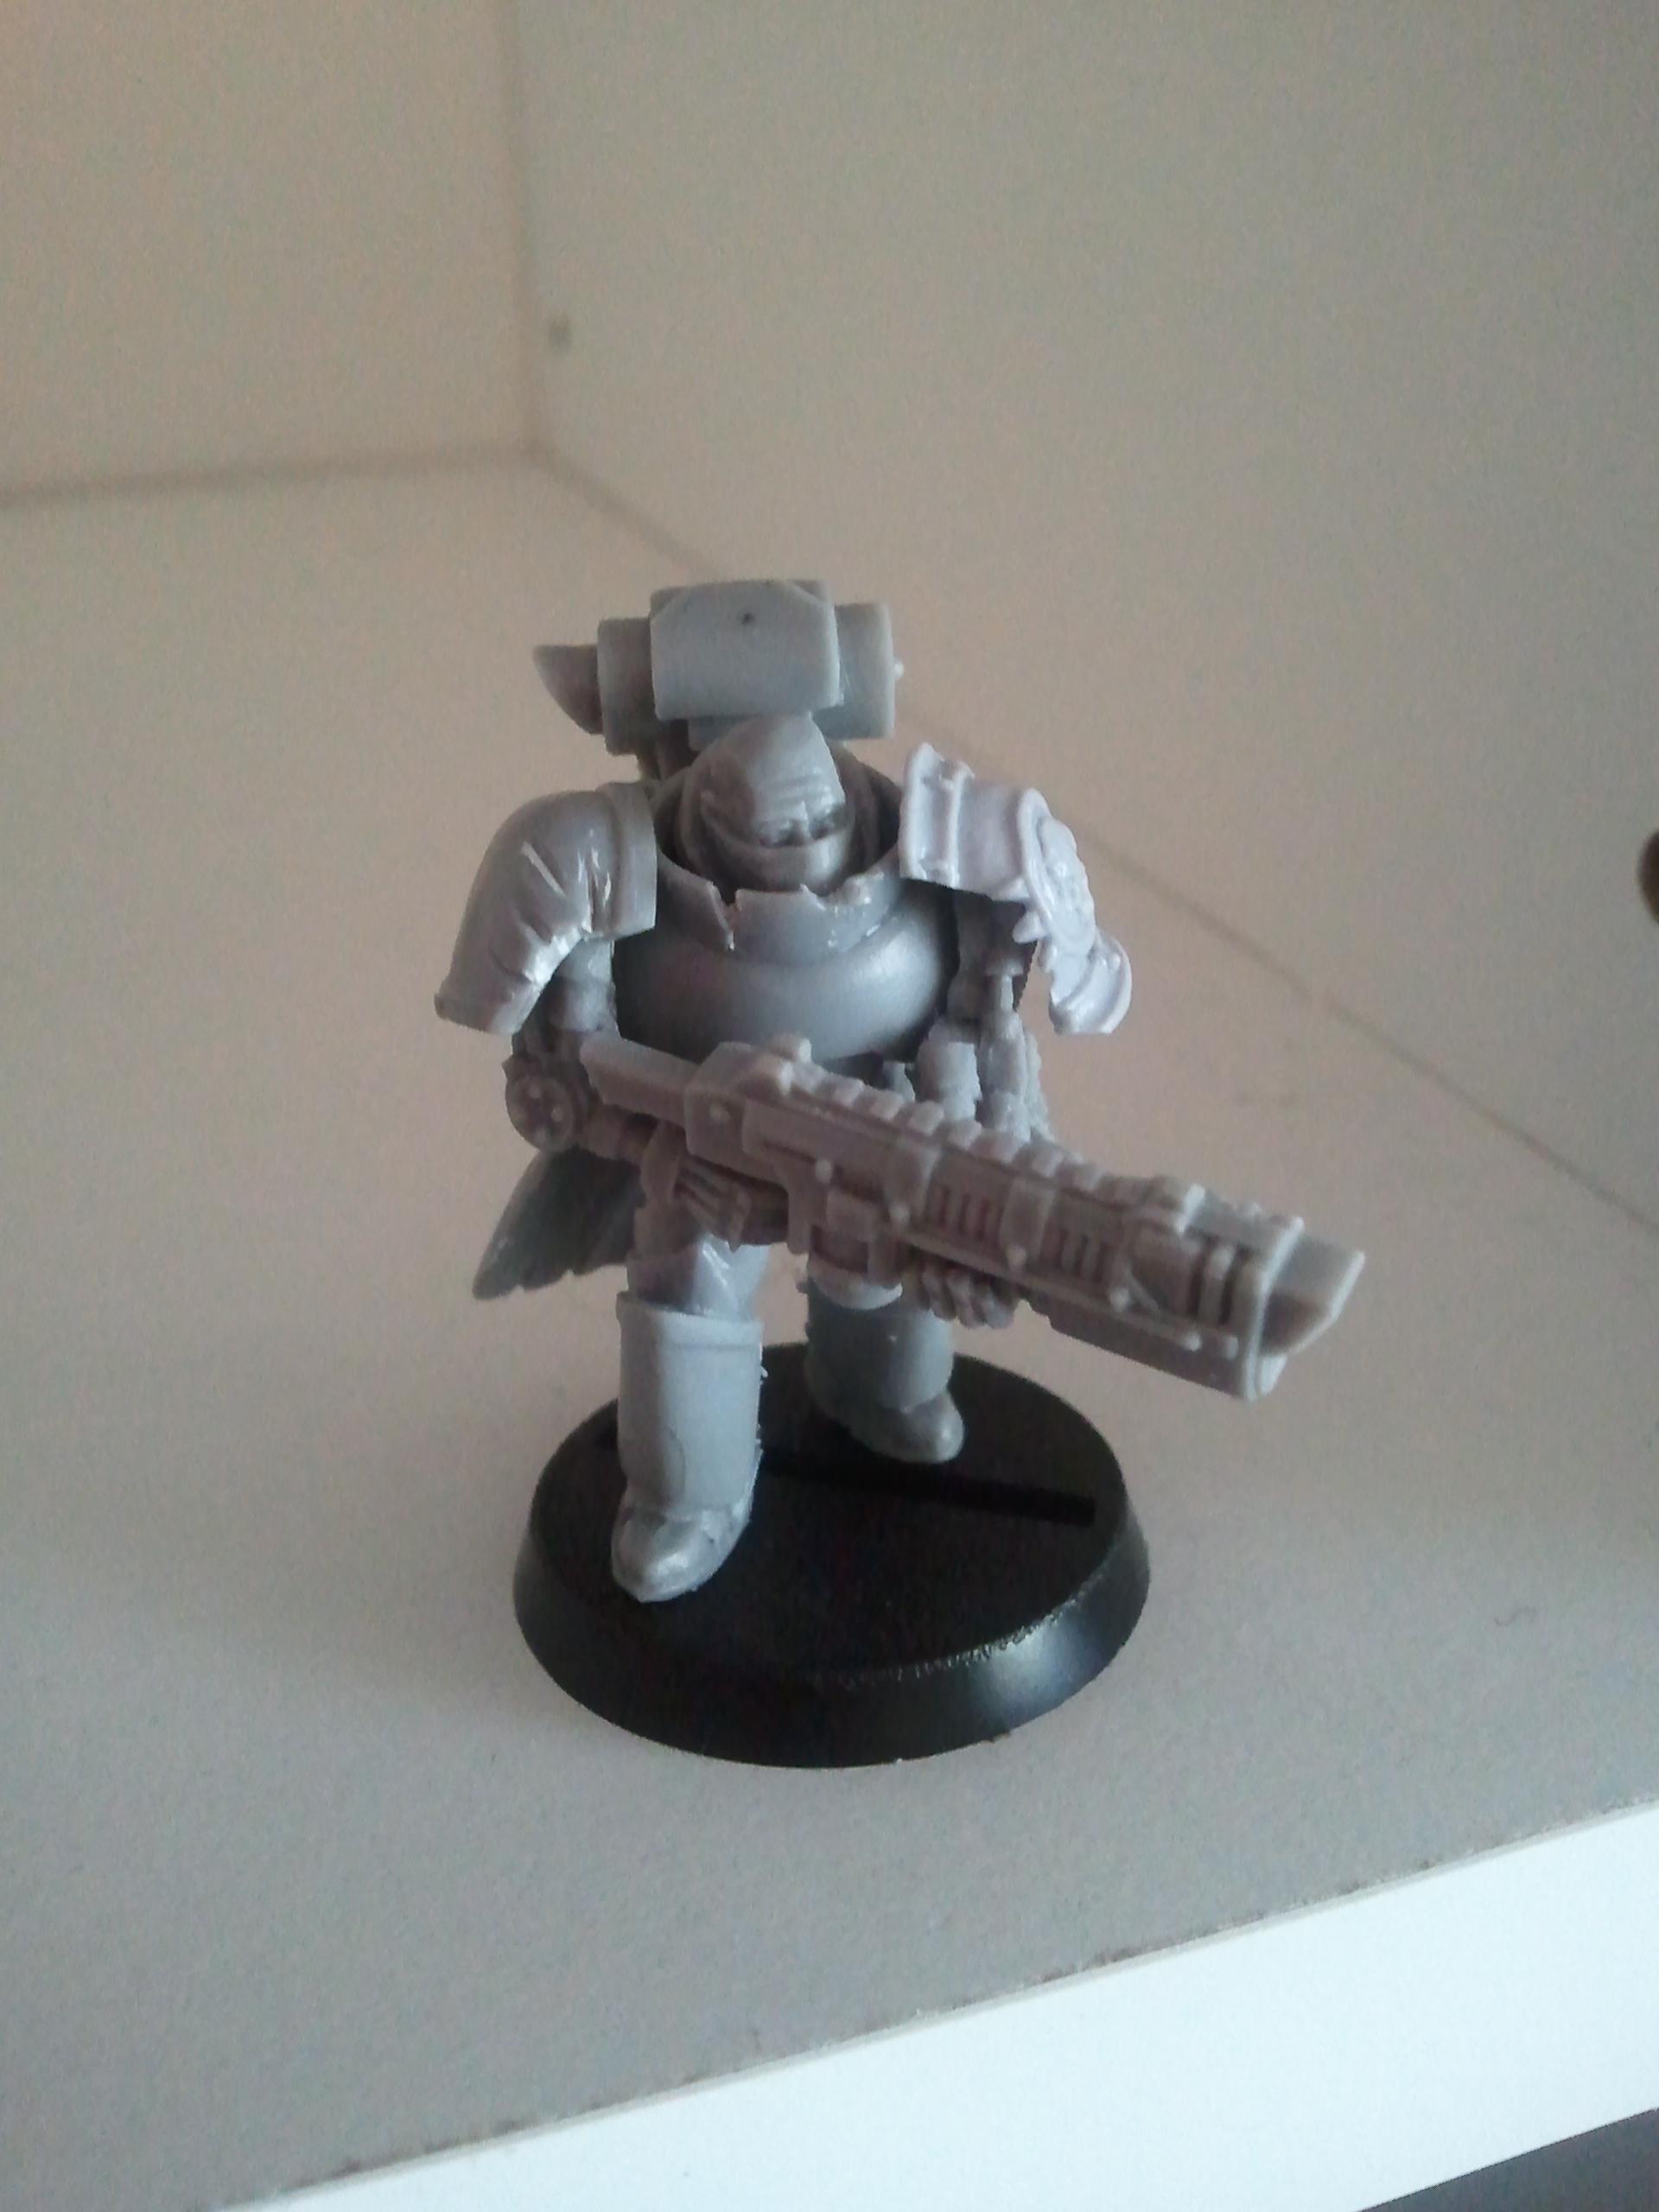 my plasma gunner, had issues with some forge world pads being broken, so thought oh well best make it look like plasma damage